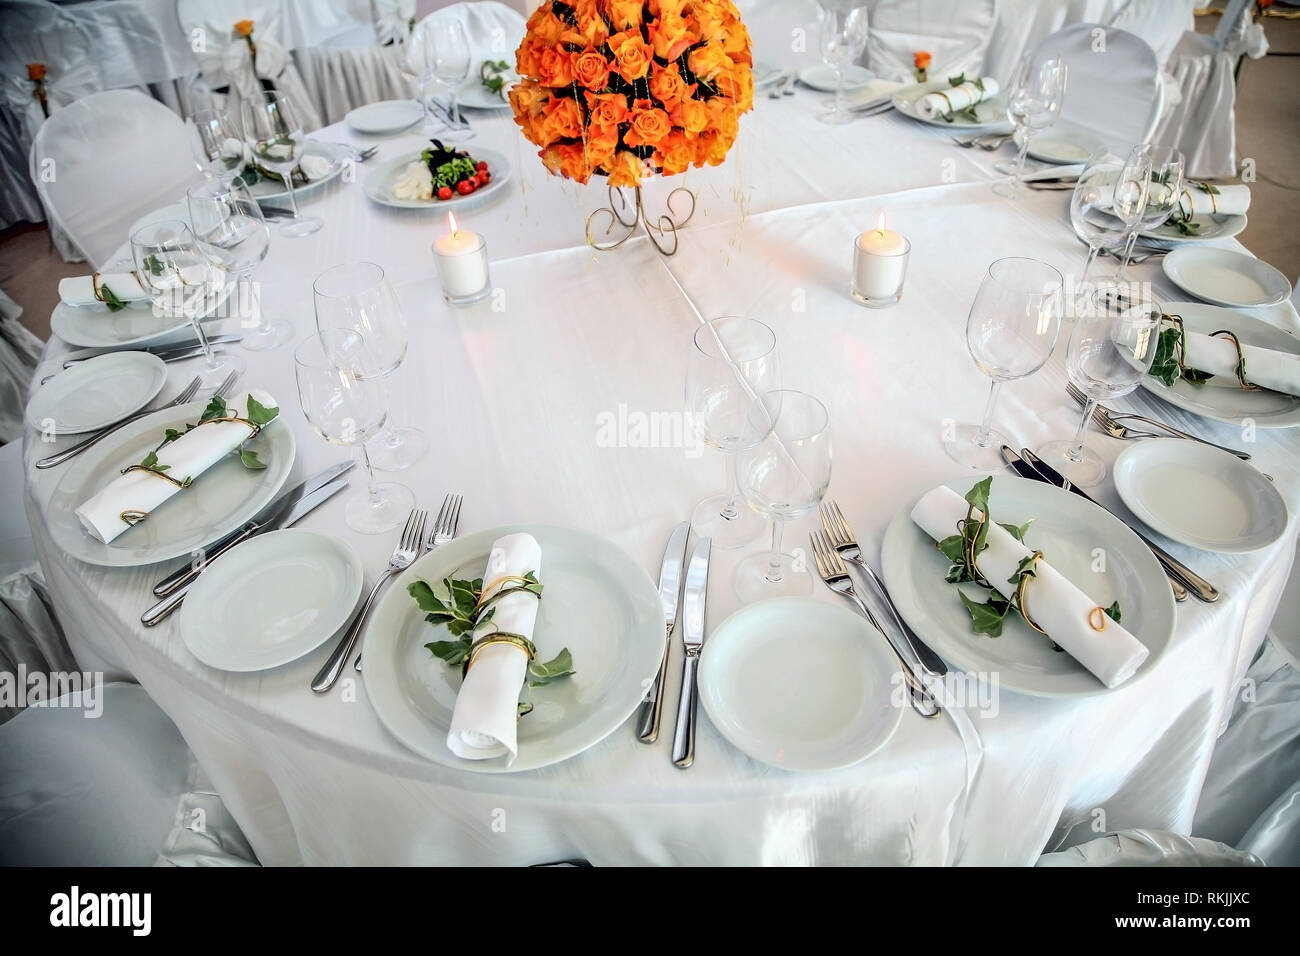 Holiday table setting decorated with flowers and candles. Stock Photo